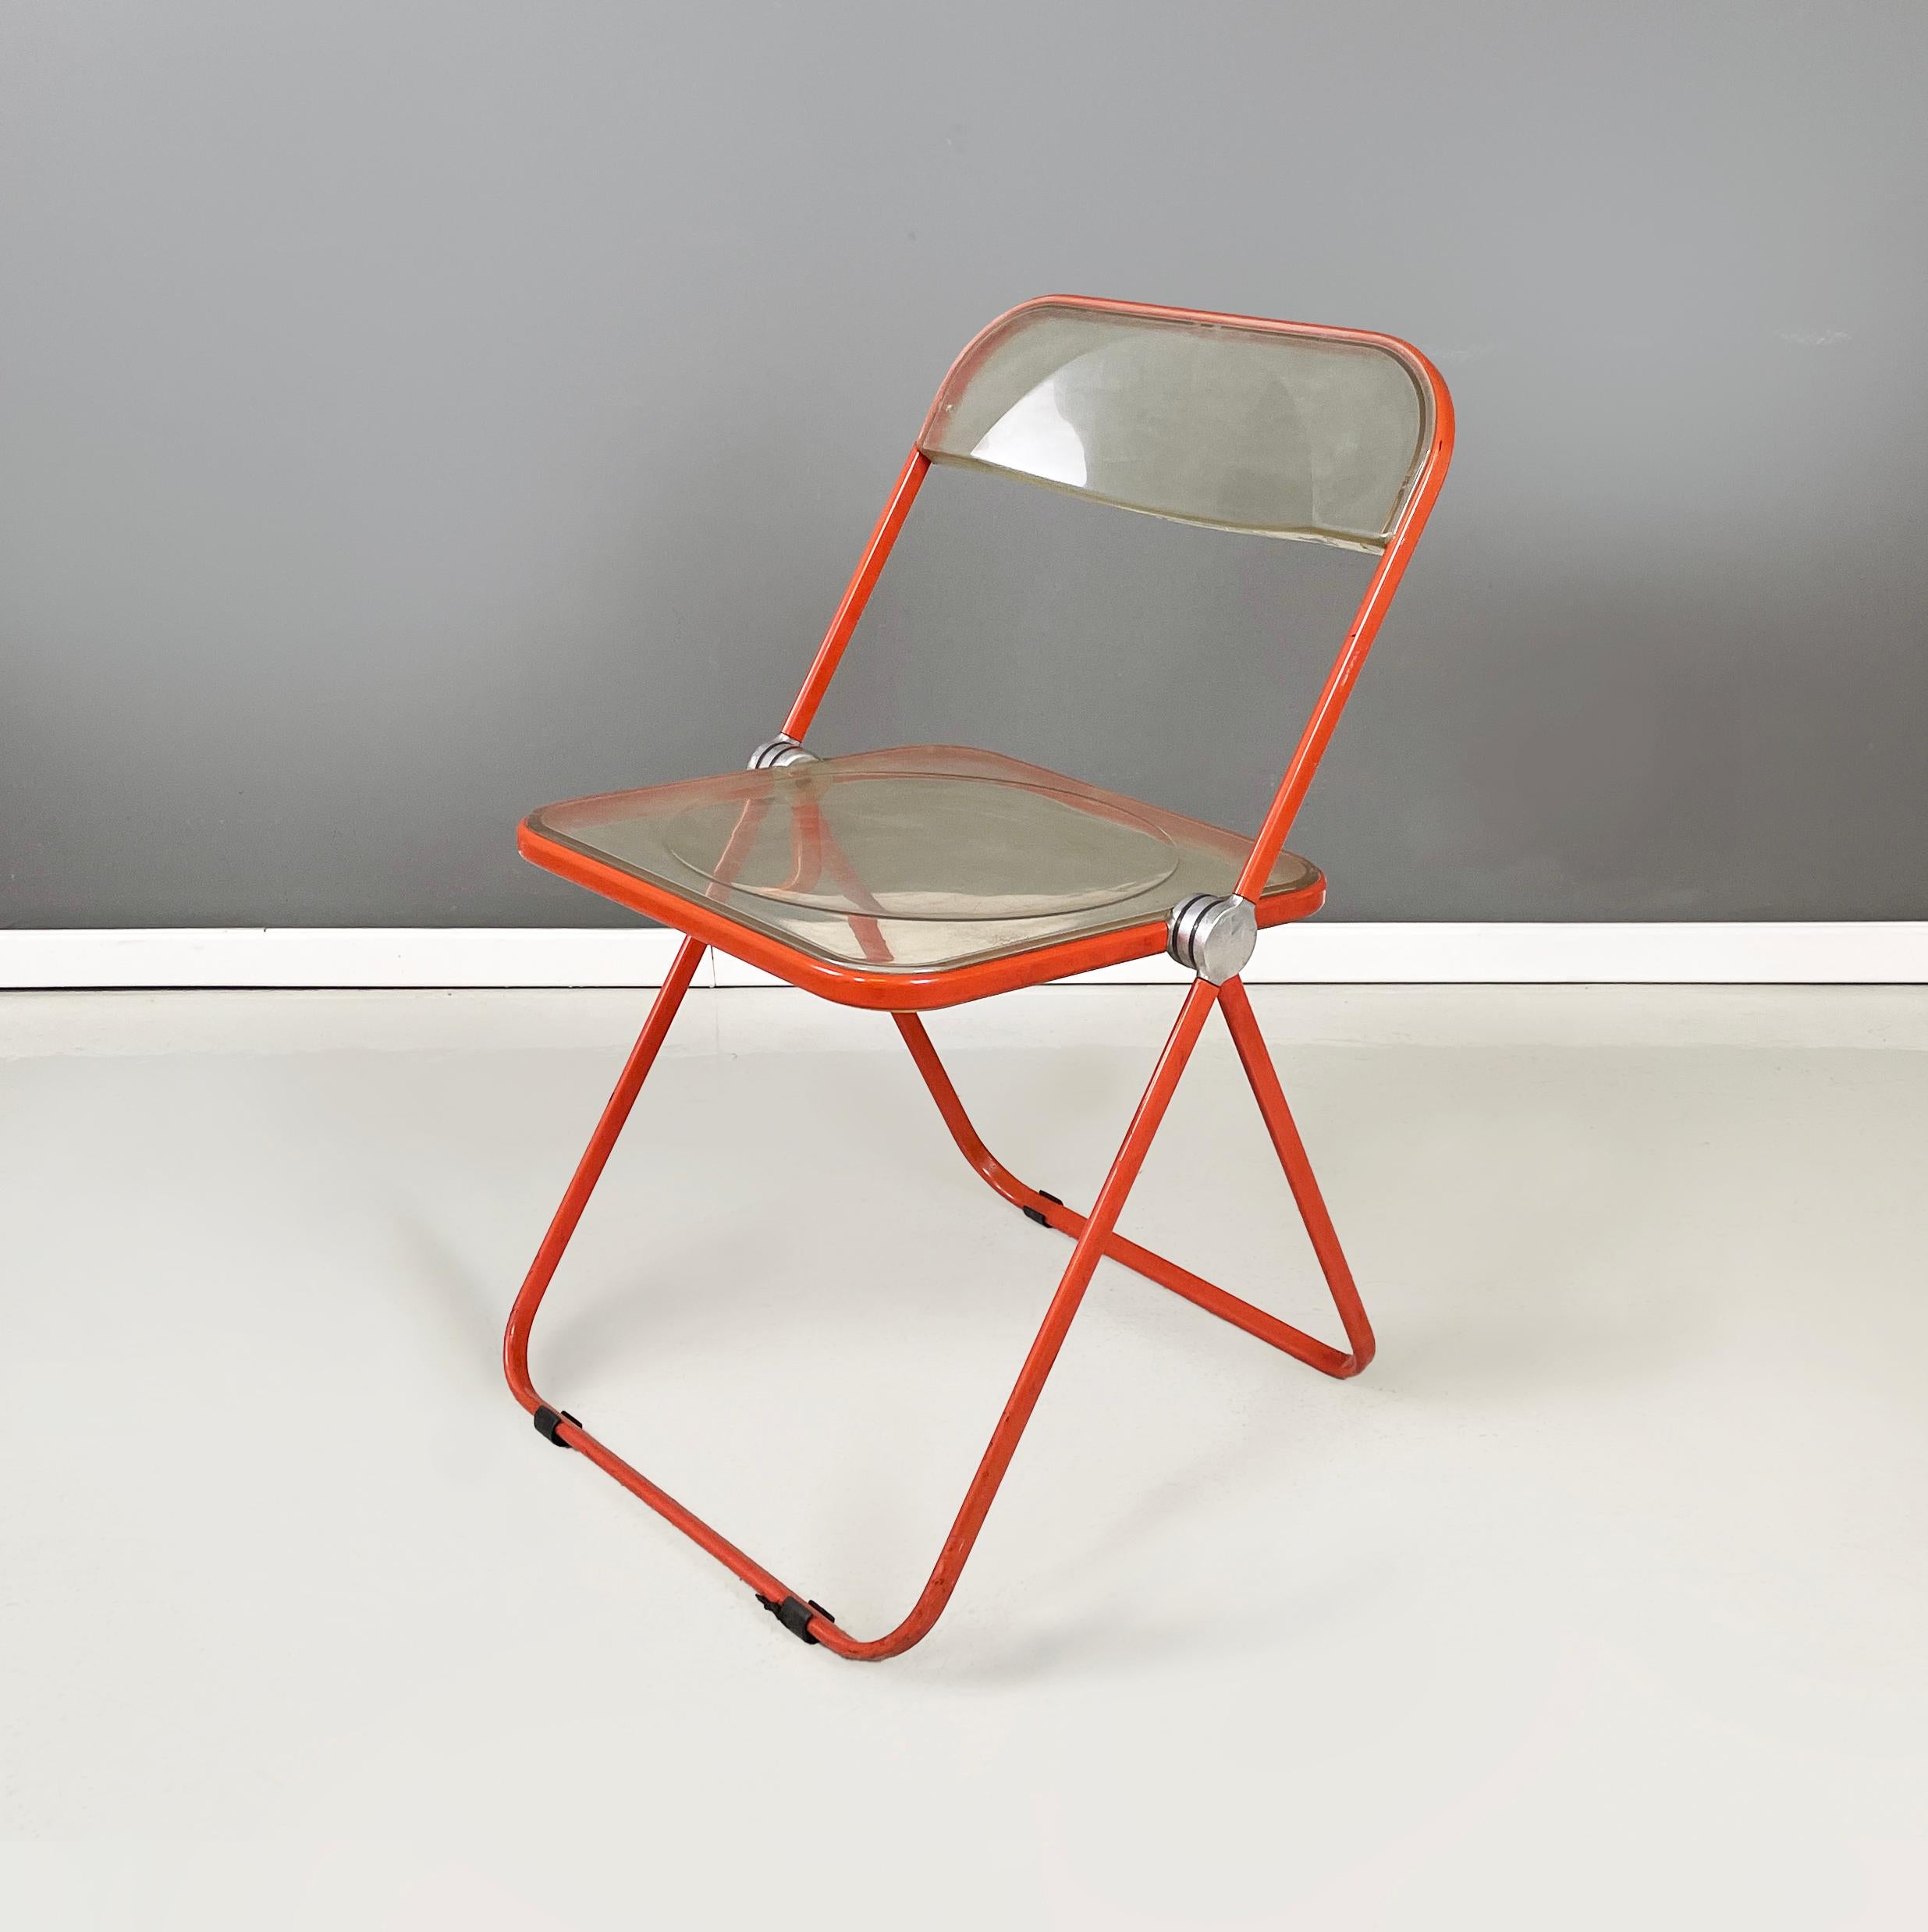 Italian modern Folding chairs mod. Plia in red metal and trasparent abs by Giancarlo Piretti for Anonima Castelli, 1970s
Set of three folding chairs mod. Plia with squared seat and backrest in yellowed transparent ABS plastic. The structure is in